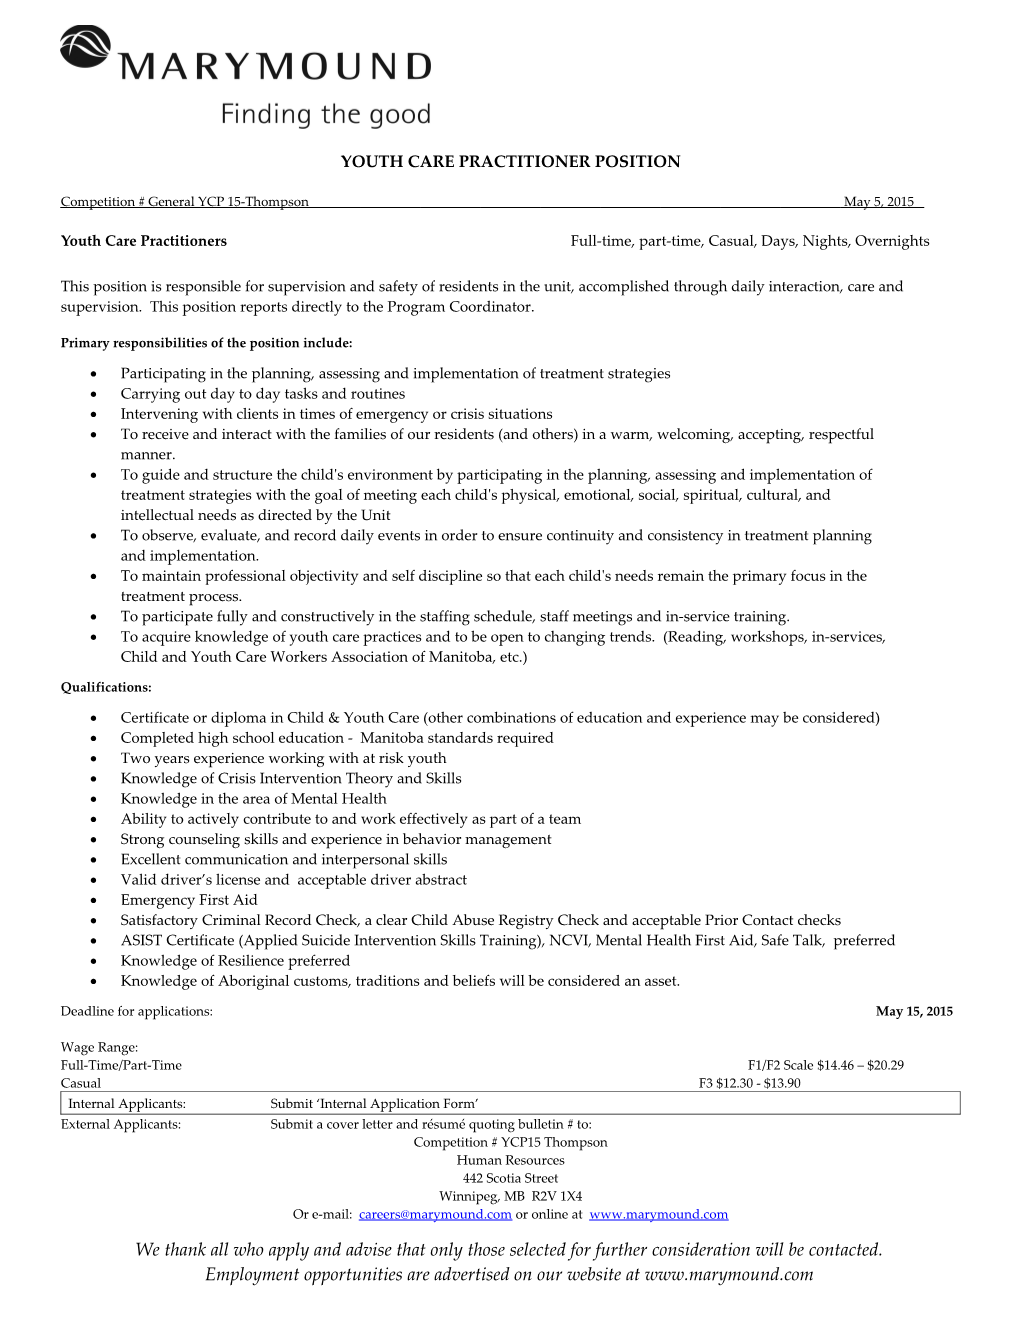 Youth Care Practitioner Position